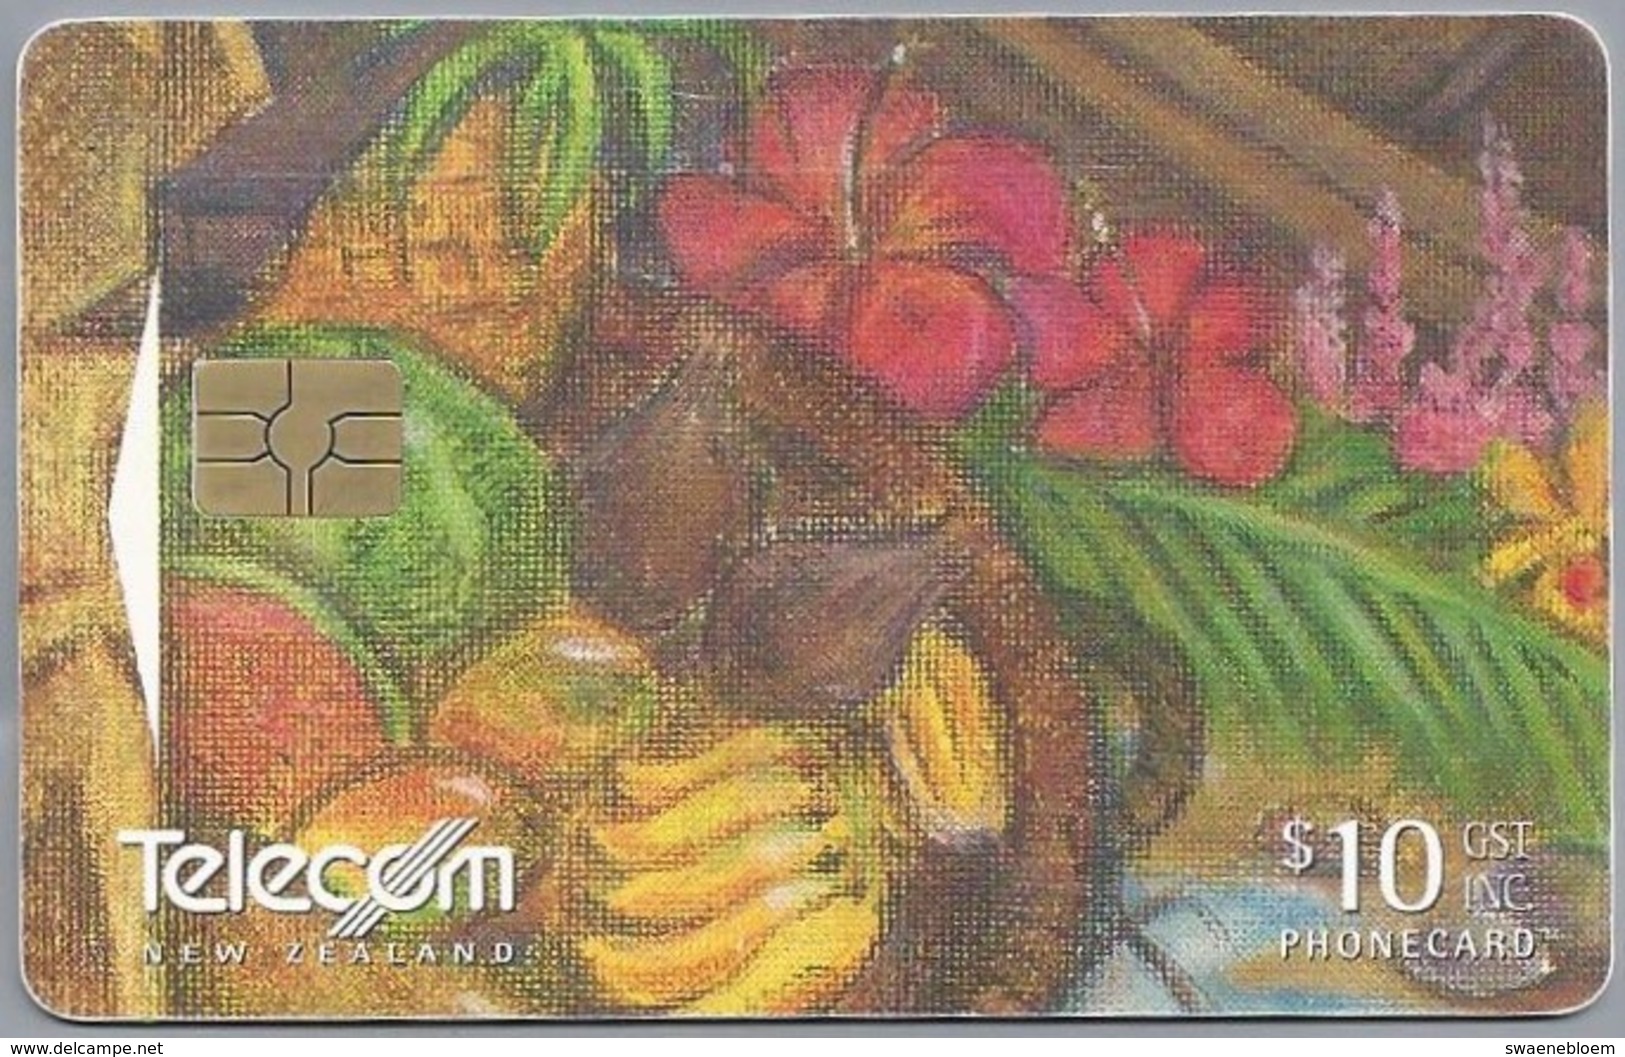 NZ.- TELECOM NEW ZEALAND PHONECARD. $ 10. .- 1 Card From Puzzle Boat, Nr. 077. - 2 Scans. - Puzzles